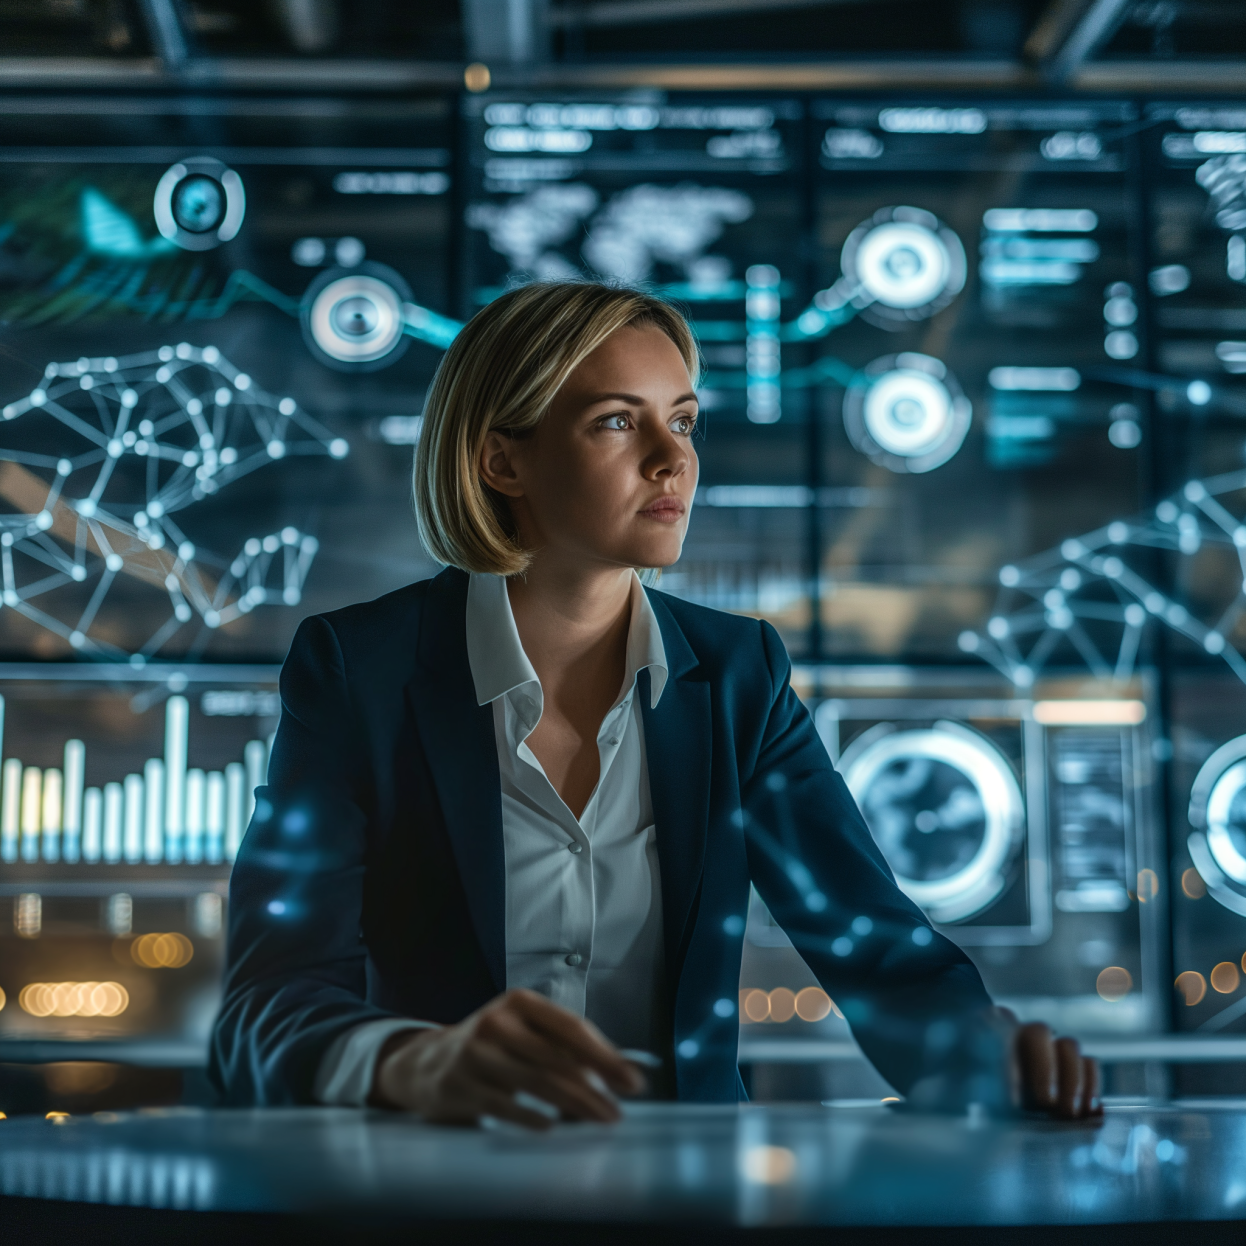 Focused professional woman analyzing data on futuristic holographic displays in a high-tech control room.